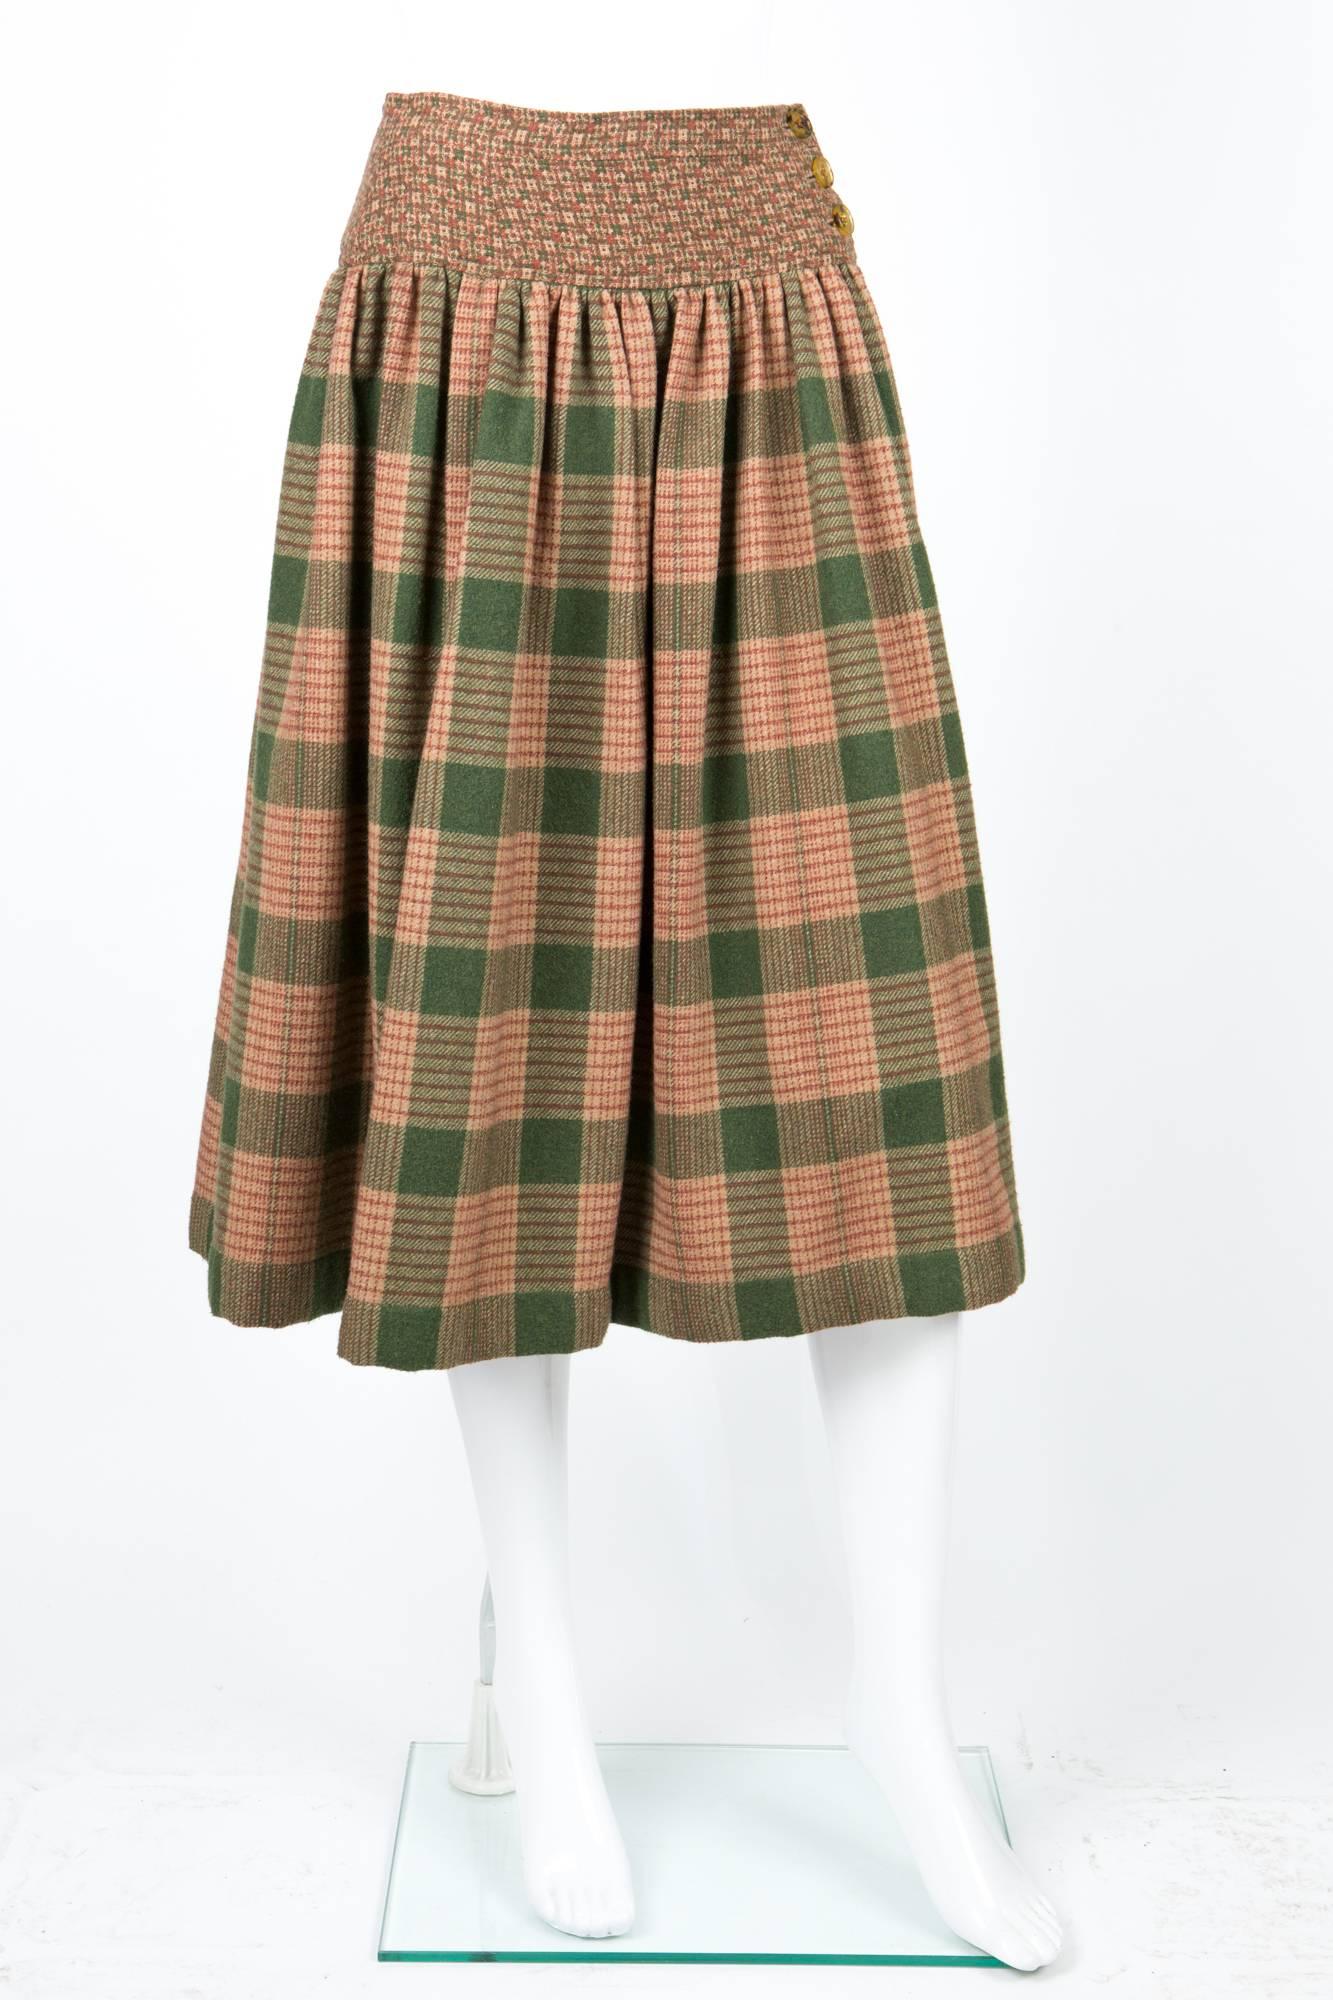 
1970s Lanvin wool  skirt featuring a camel and green check pattern, a large flat waistband yoke (3,9in (10cm)) with buttons, sides pockets..
In excellent vintage condition. Made in France.
Waist 27,5 in. ( 70 cm )
Hips 52in. (132cm)
Bottom width